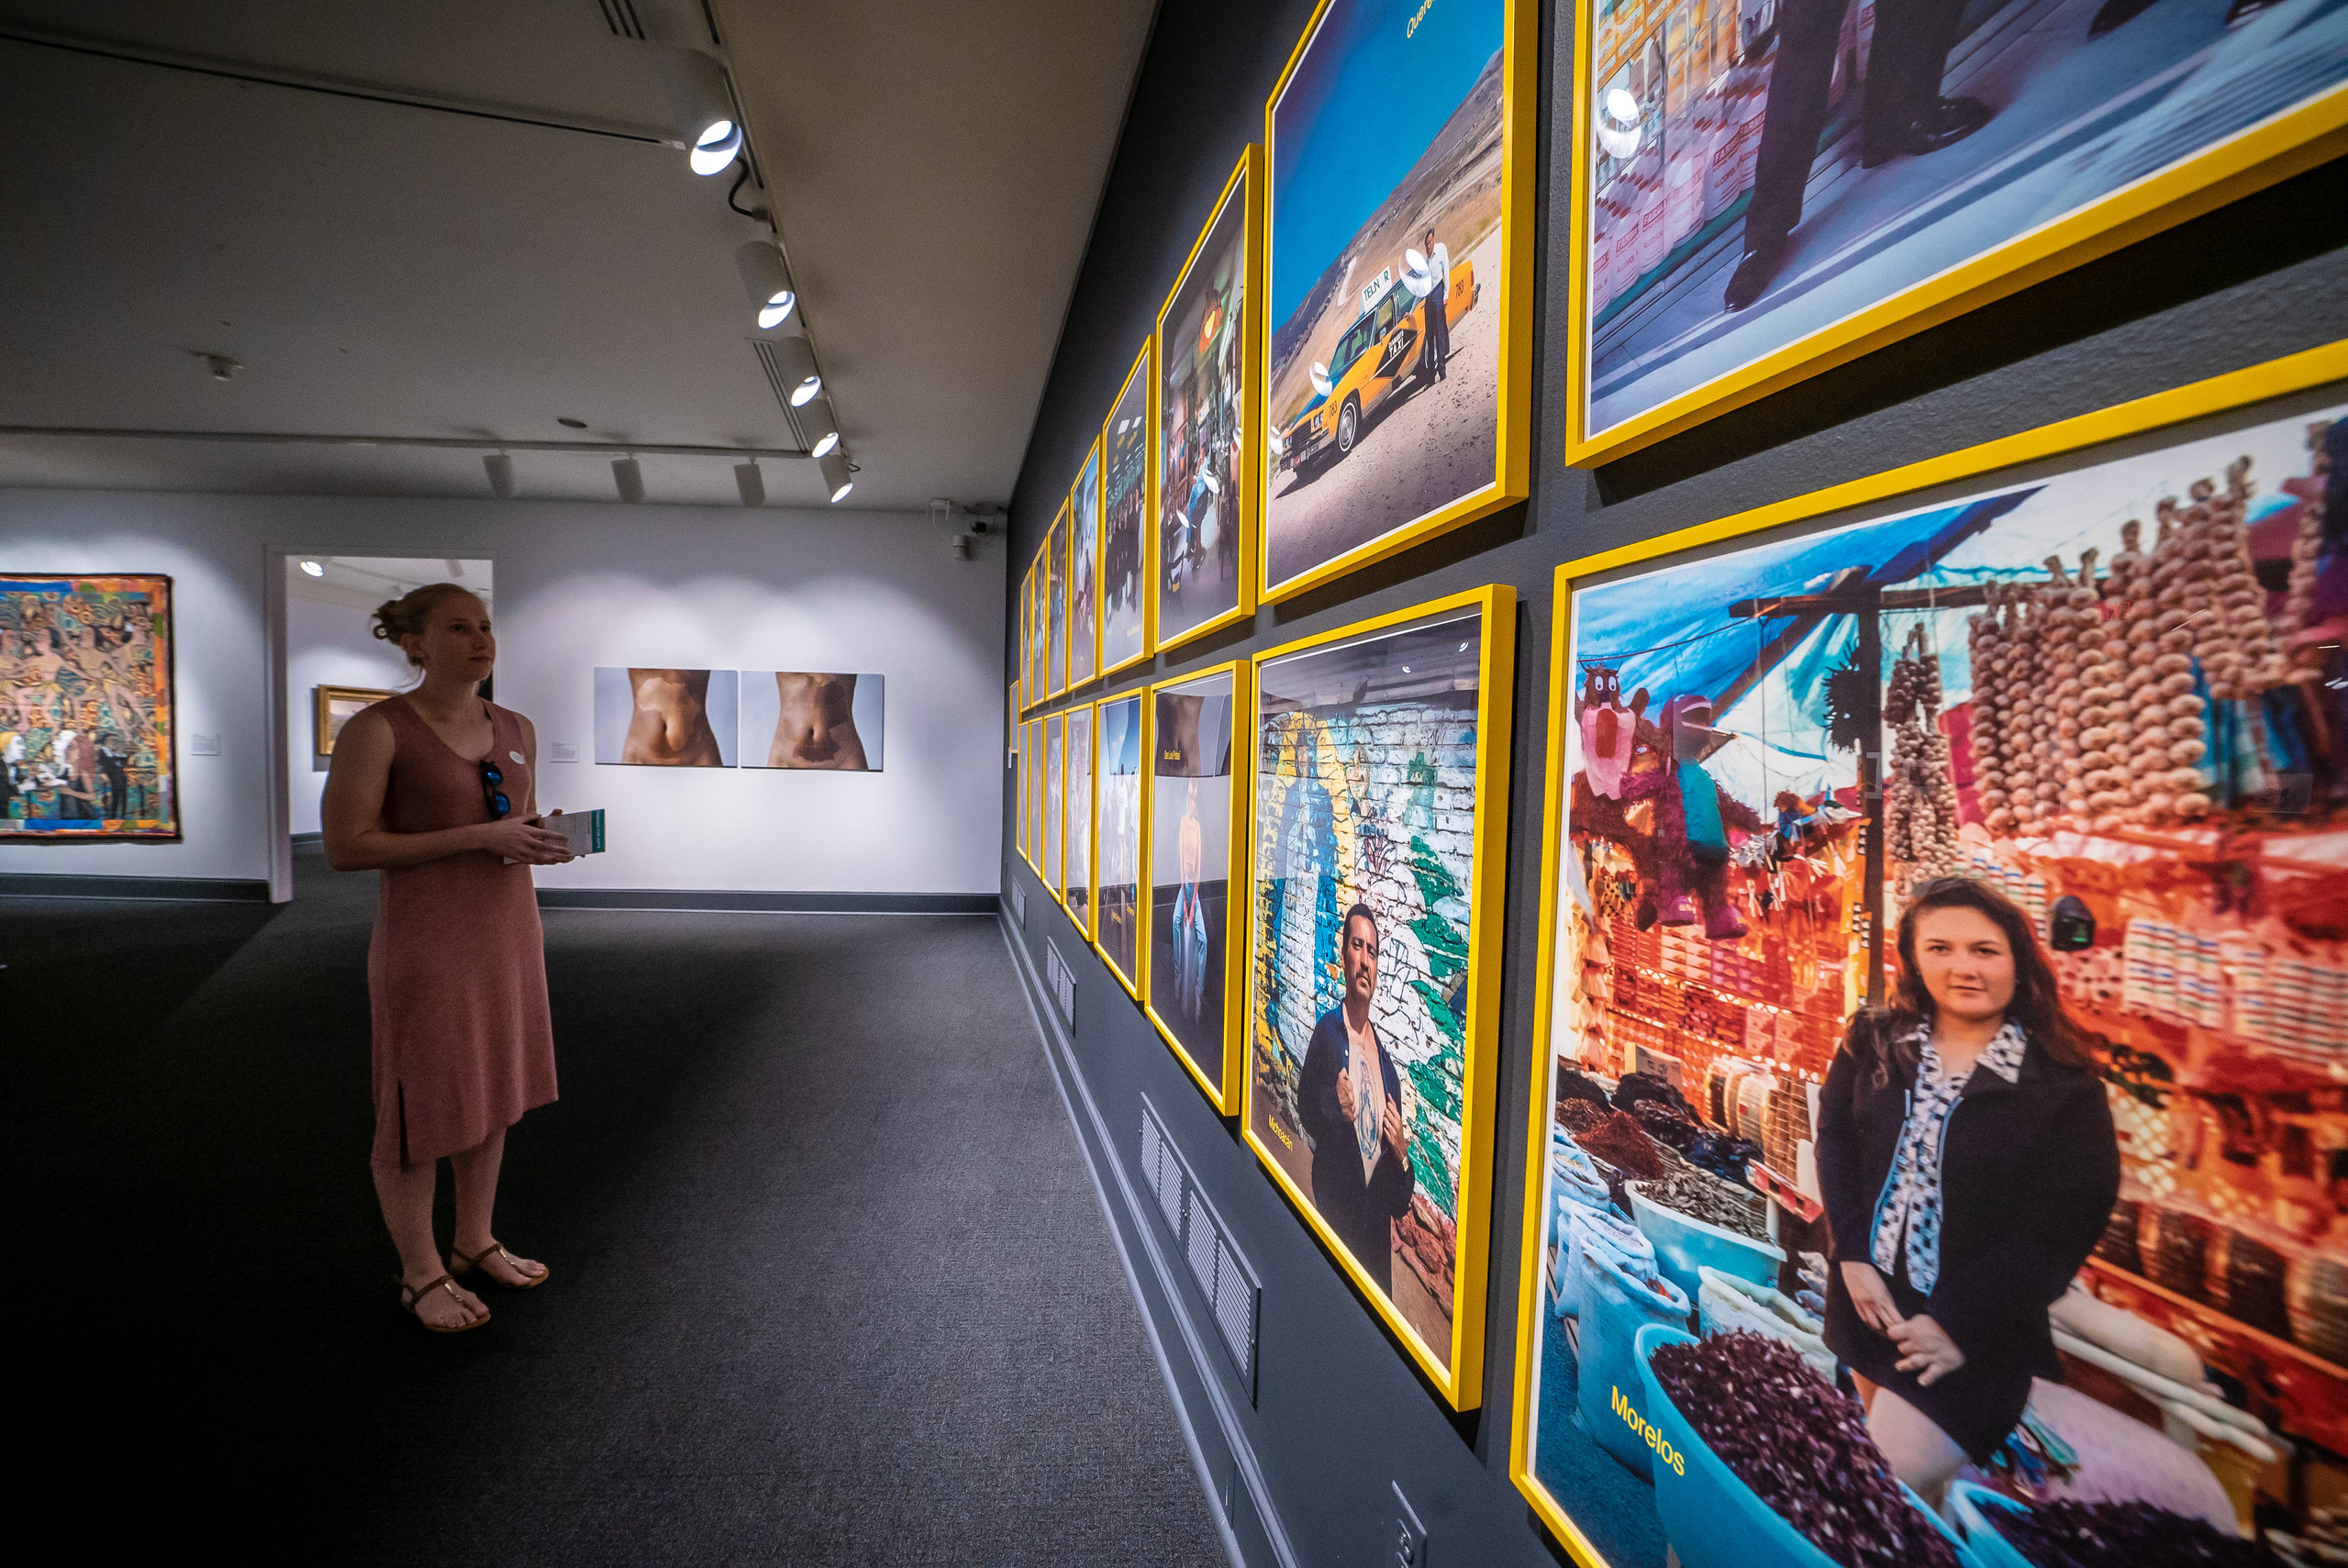 Gallery view of a person with light skin looking at a wall of photographs in bright yellow frames. Two artworks hand on the far wall.